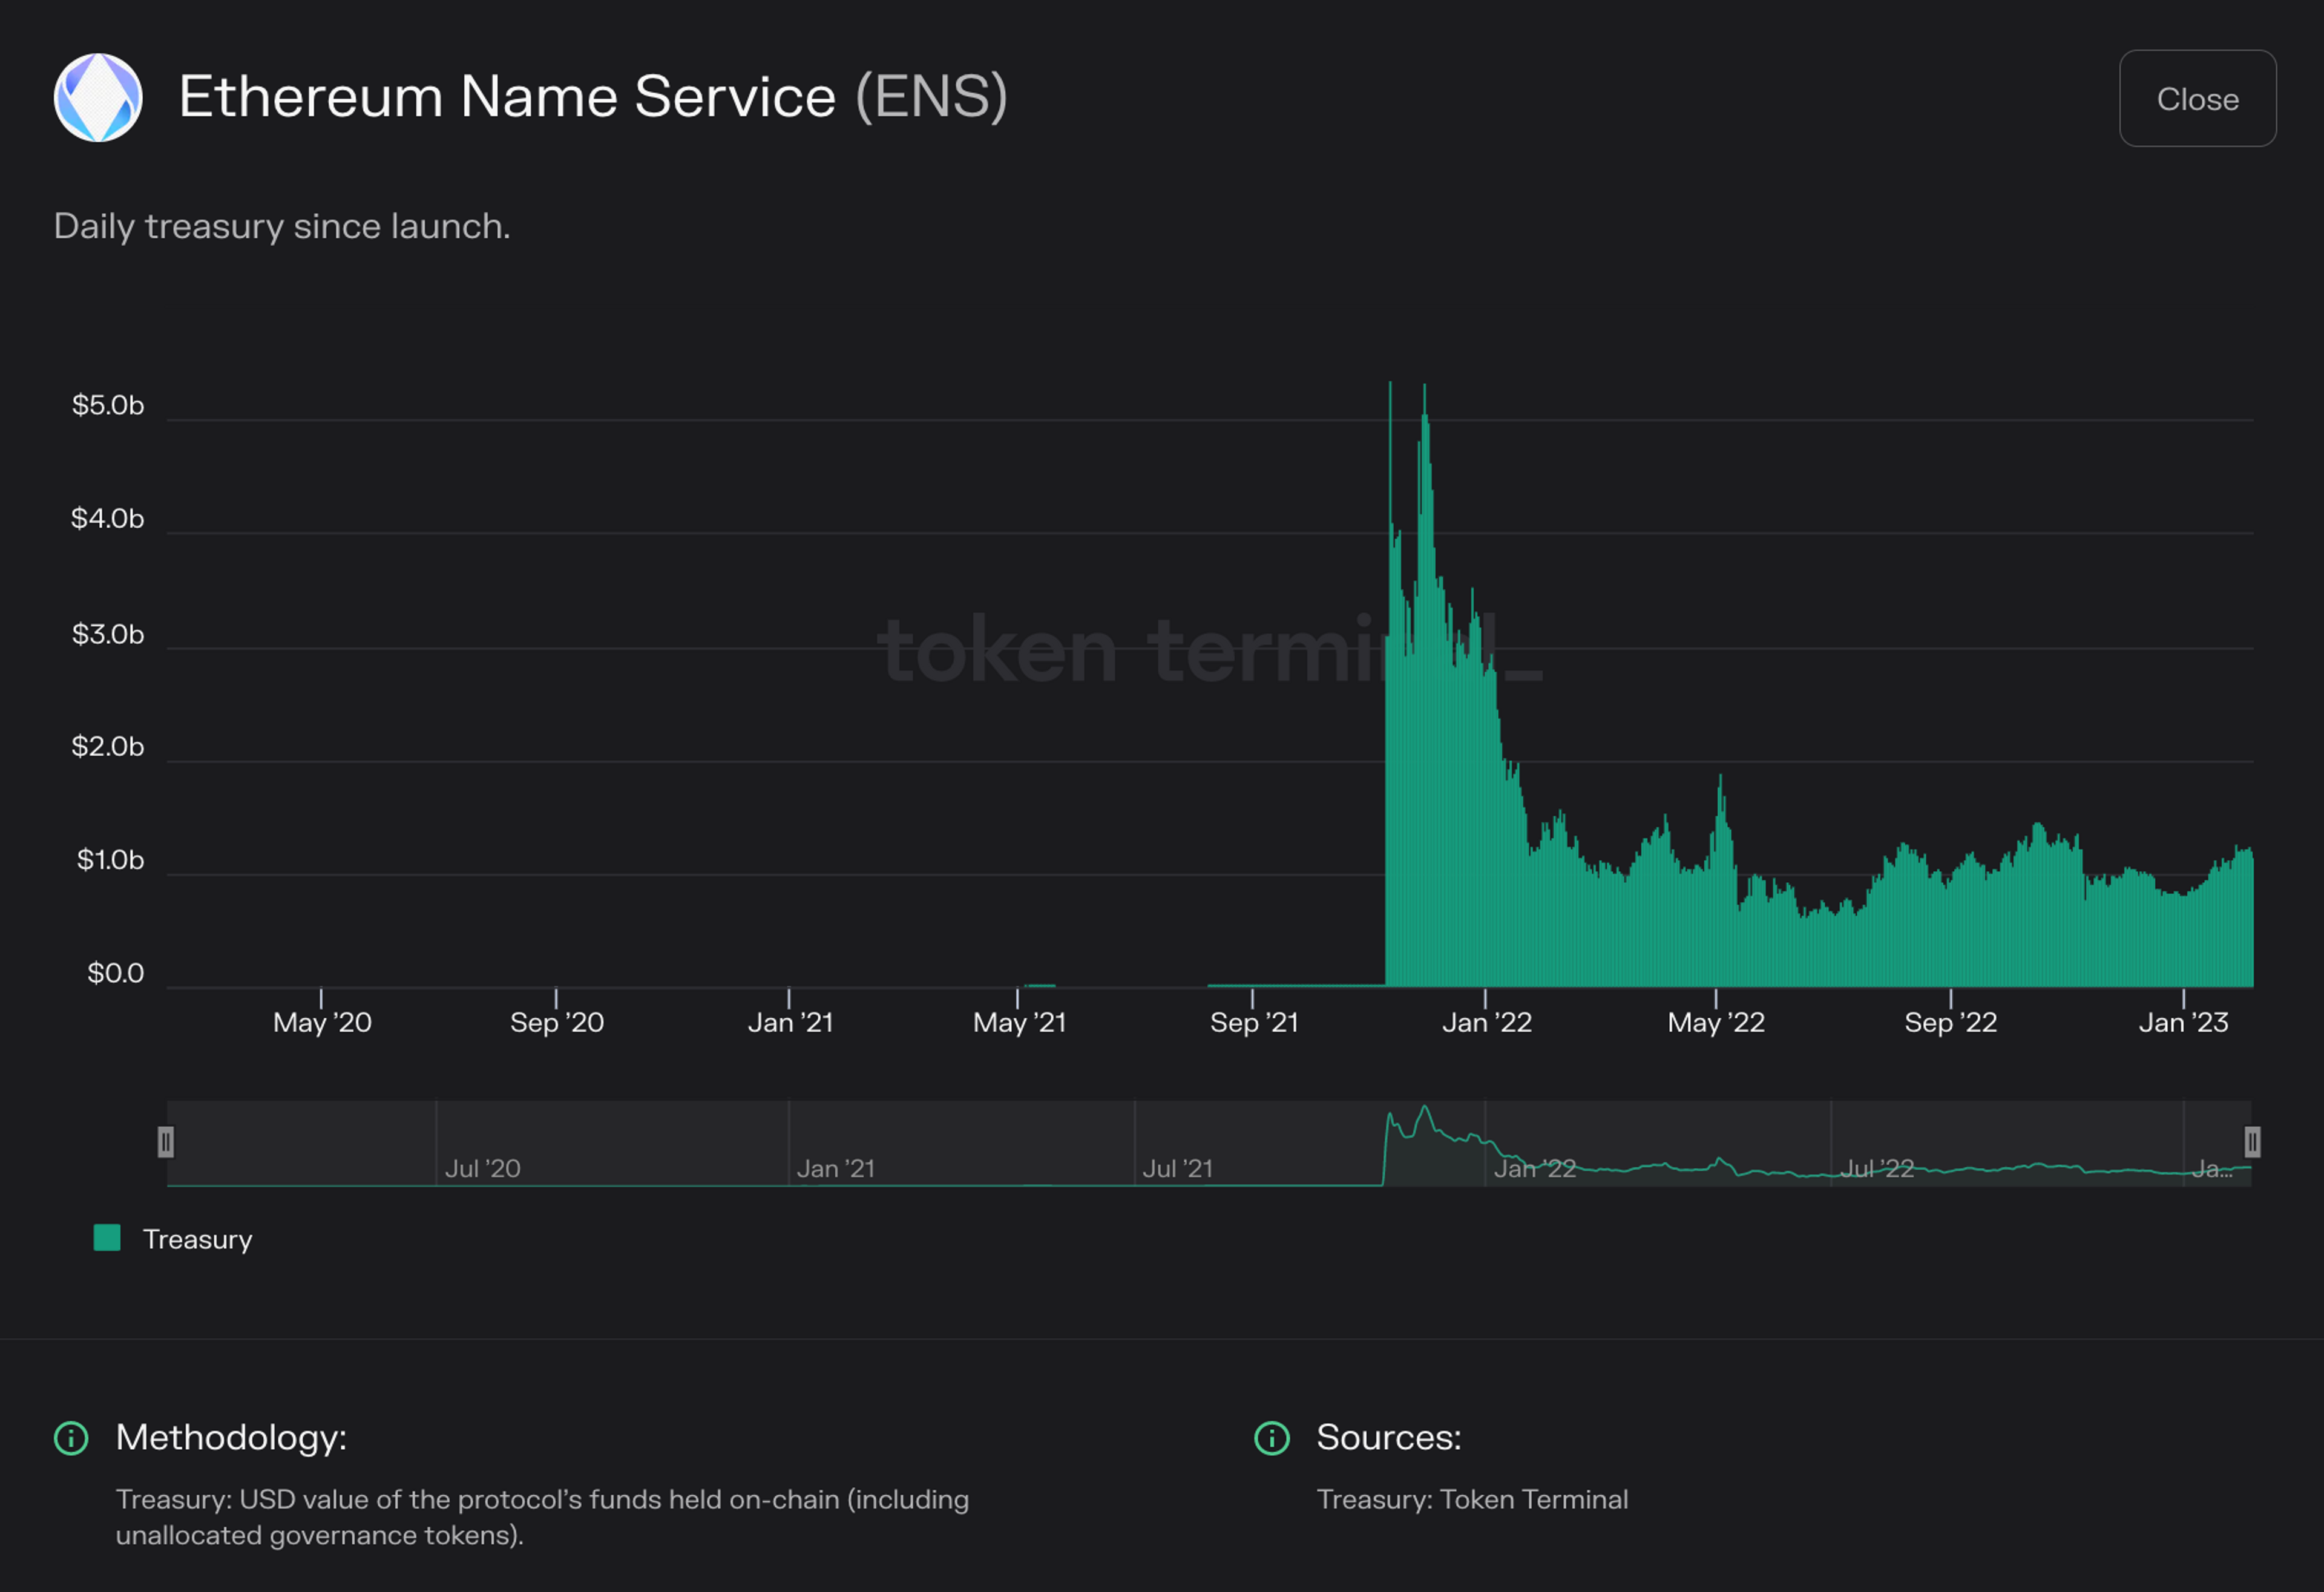 Chart of Ethereum Name Service daily treasury